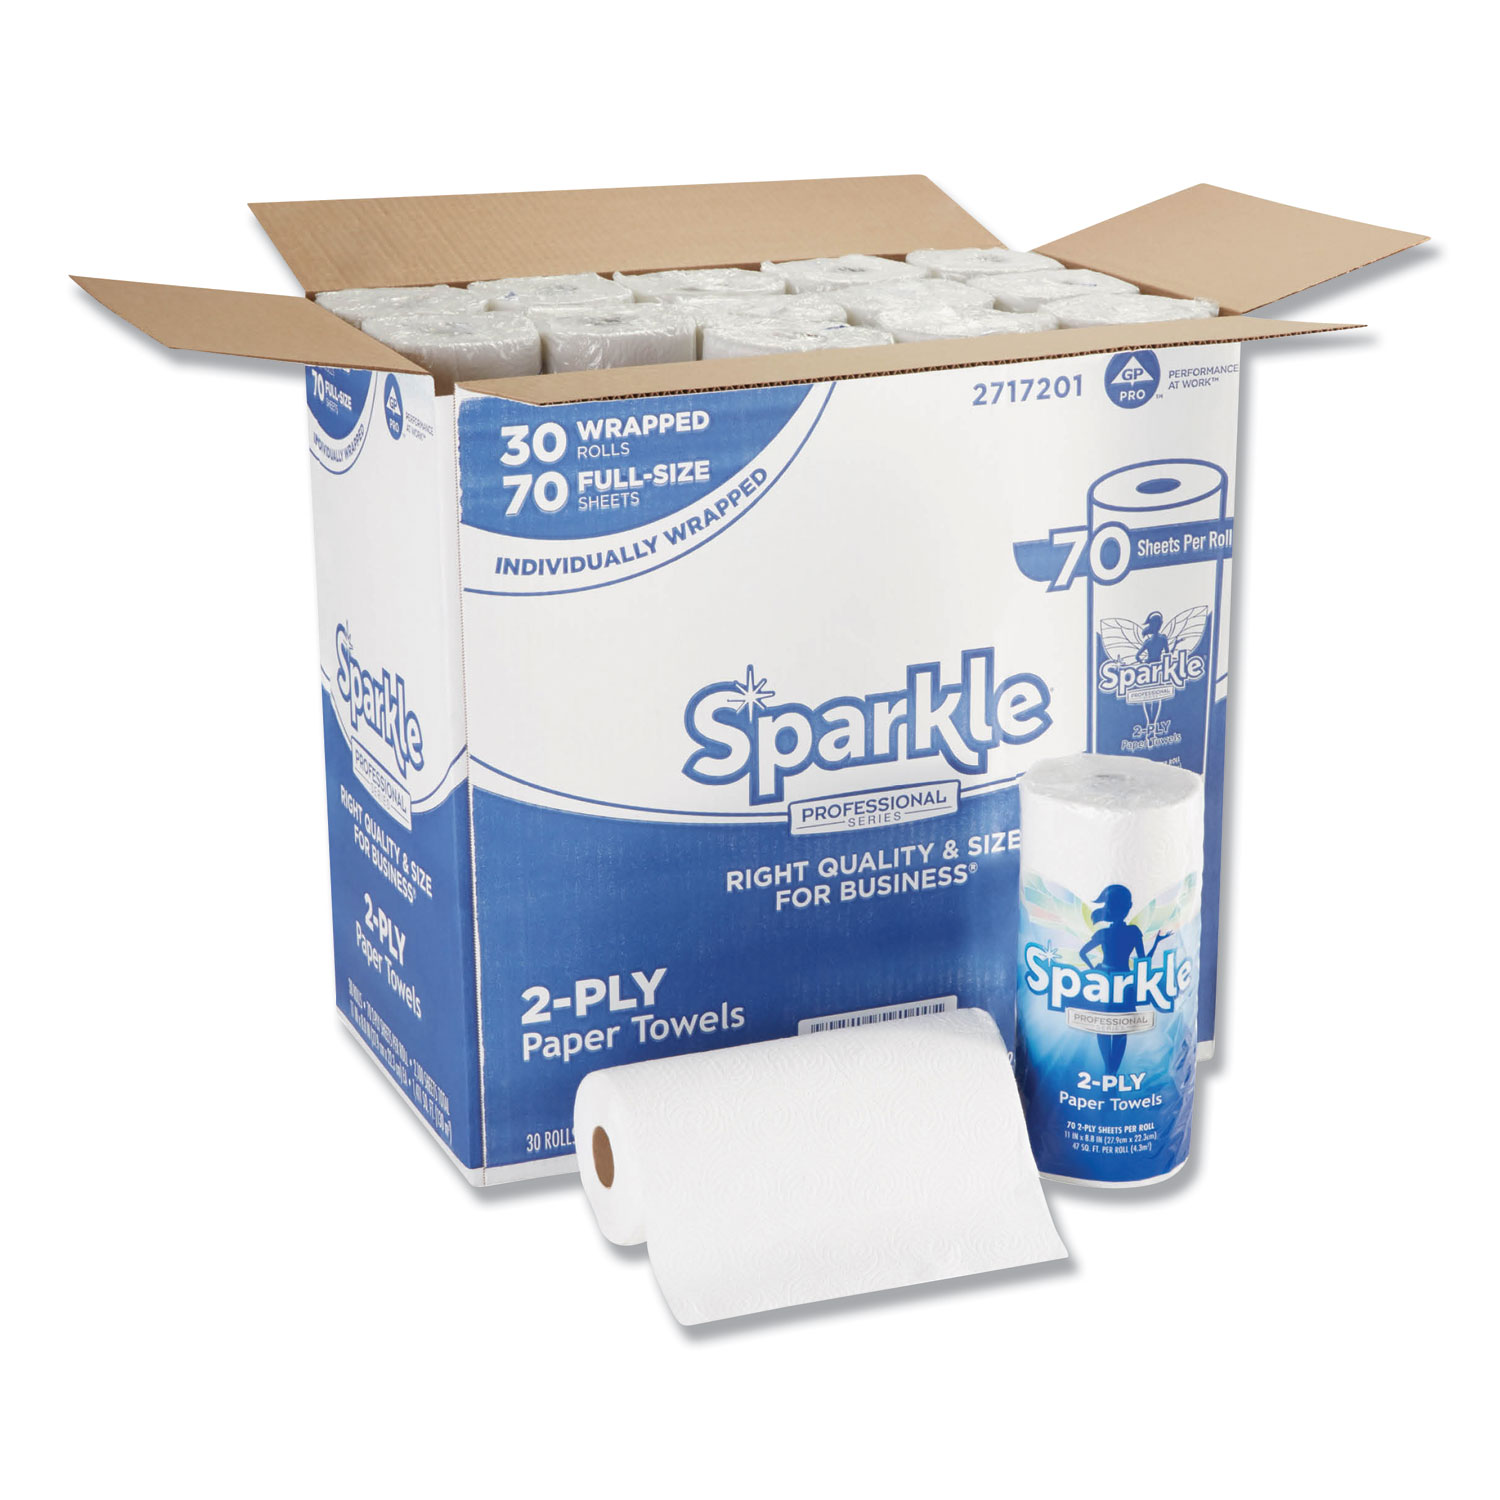  Georgia Pacific Professional 2717201 Sparkle ps Perforated Paper Towels, 2-Ply, 11x8 4/5, White,70 Sheets,30 Rolls/Ct (GPC2717201) 